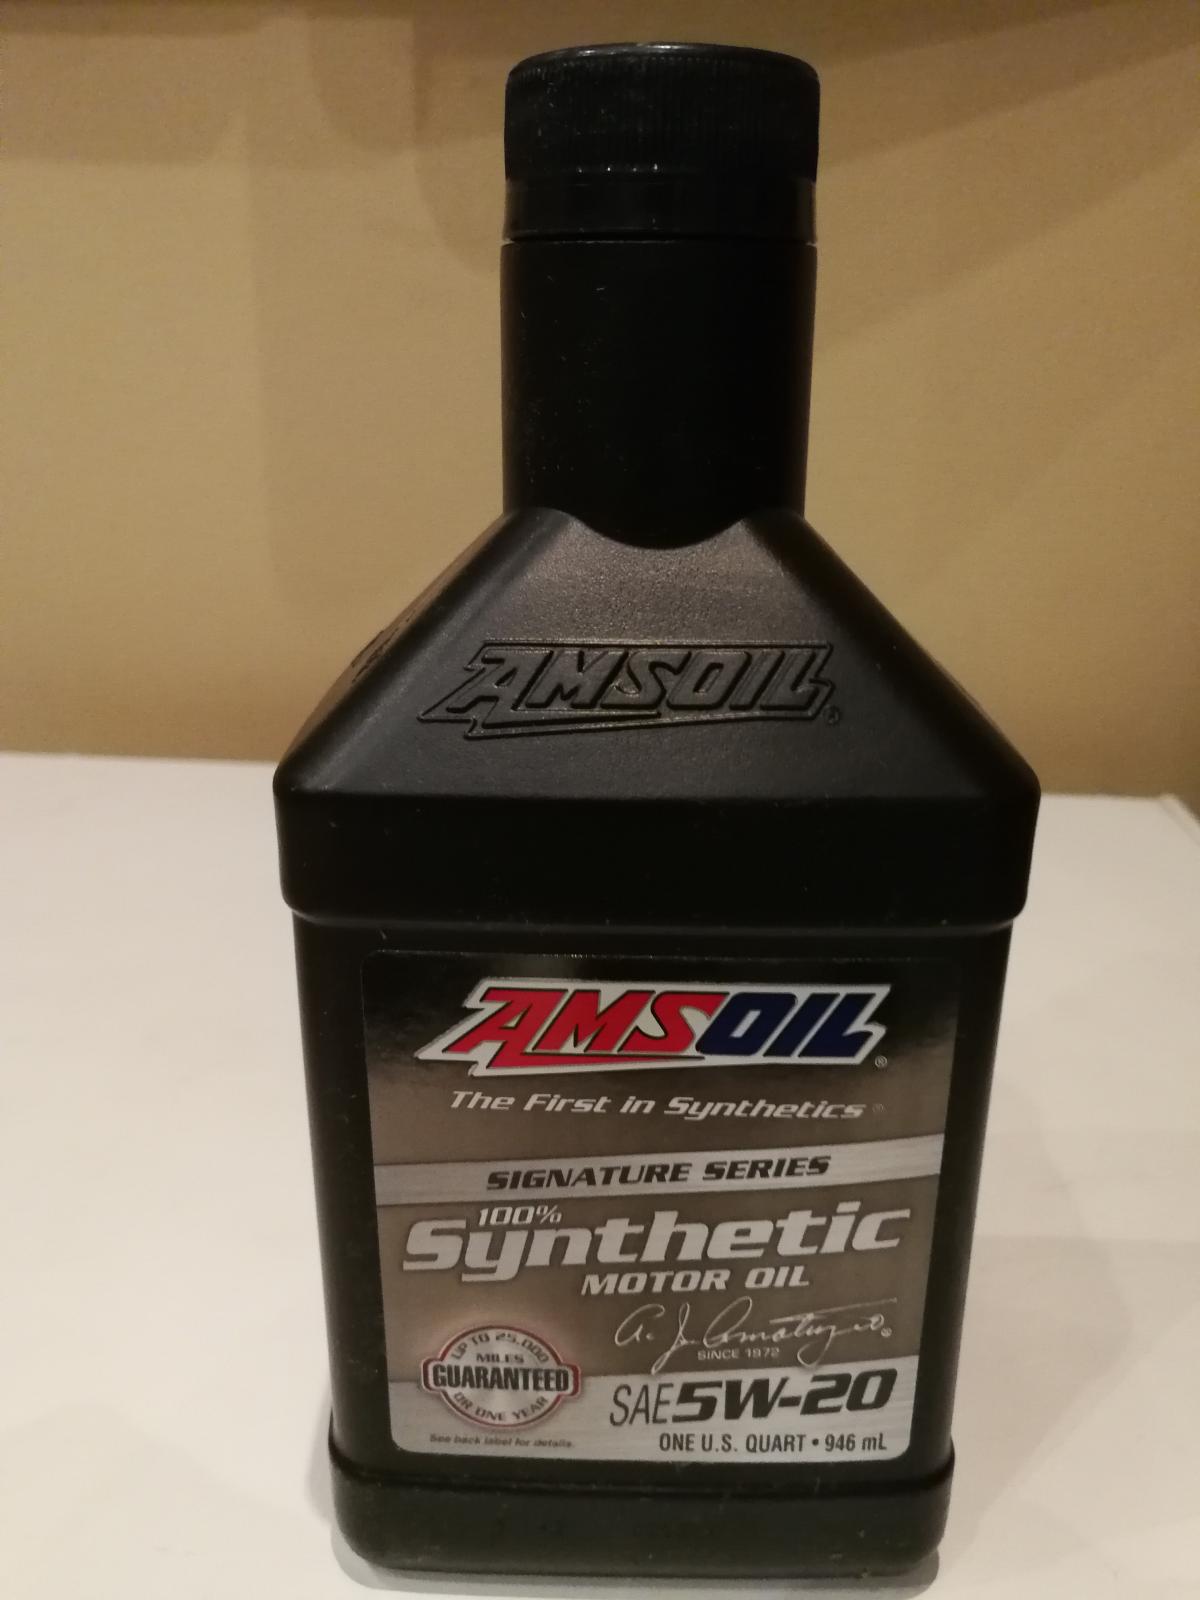 Amsoil signature series synthetic. AMSOIL 5w20. 75w140 AMSOIL. AMSOIL 75w-110. AMSOIL 75w140 LSD допуски.